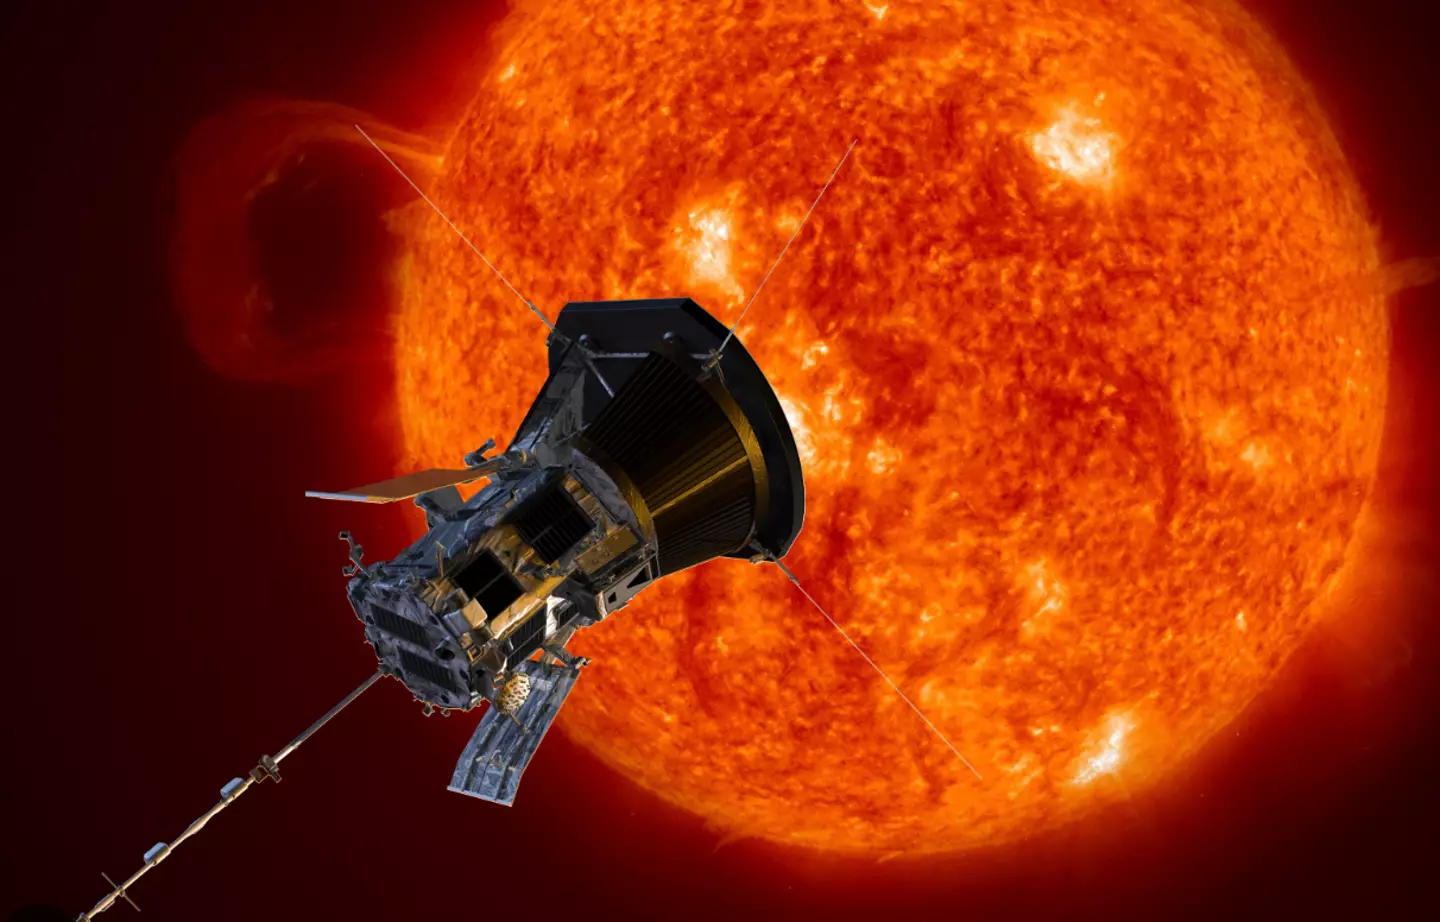 The man-made probe was sent to the sun's atmosphere. credit: sciencemuseumblog